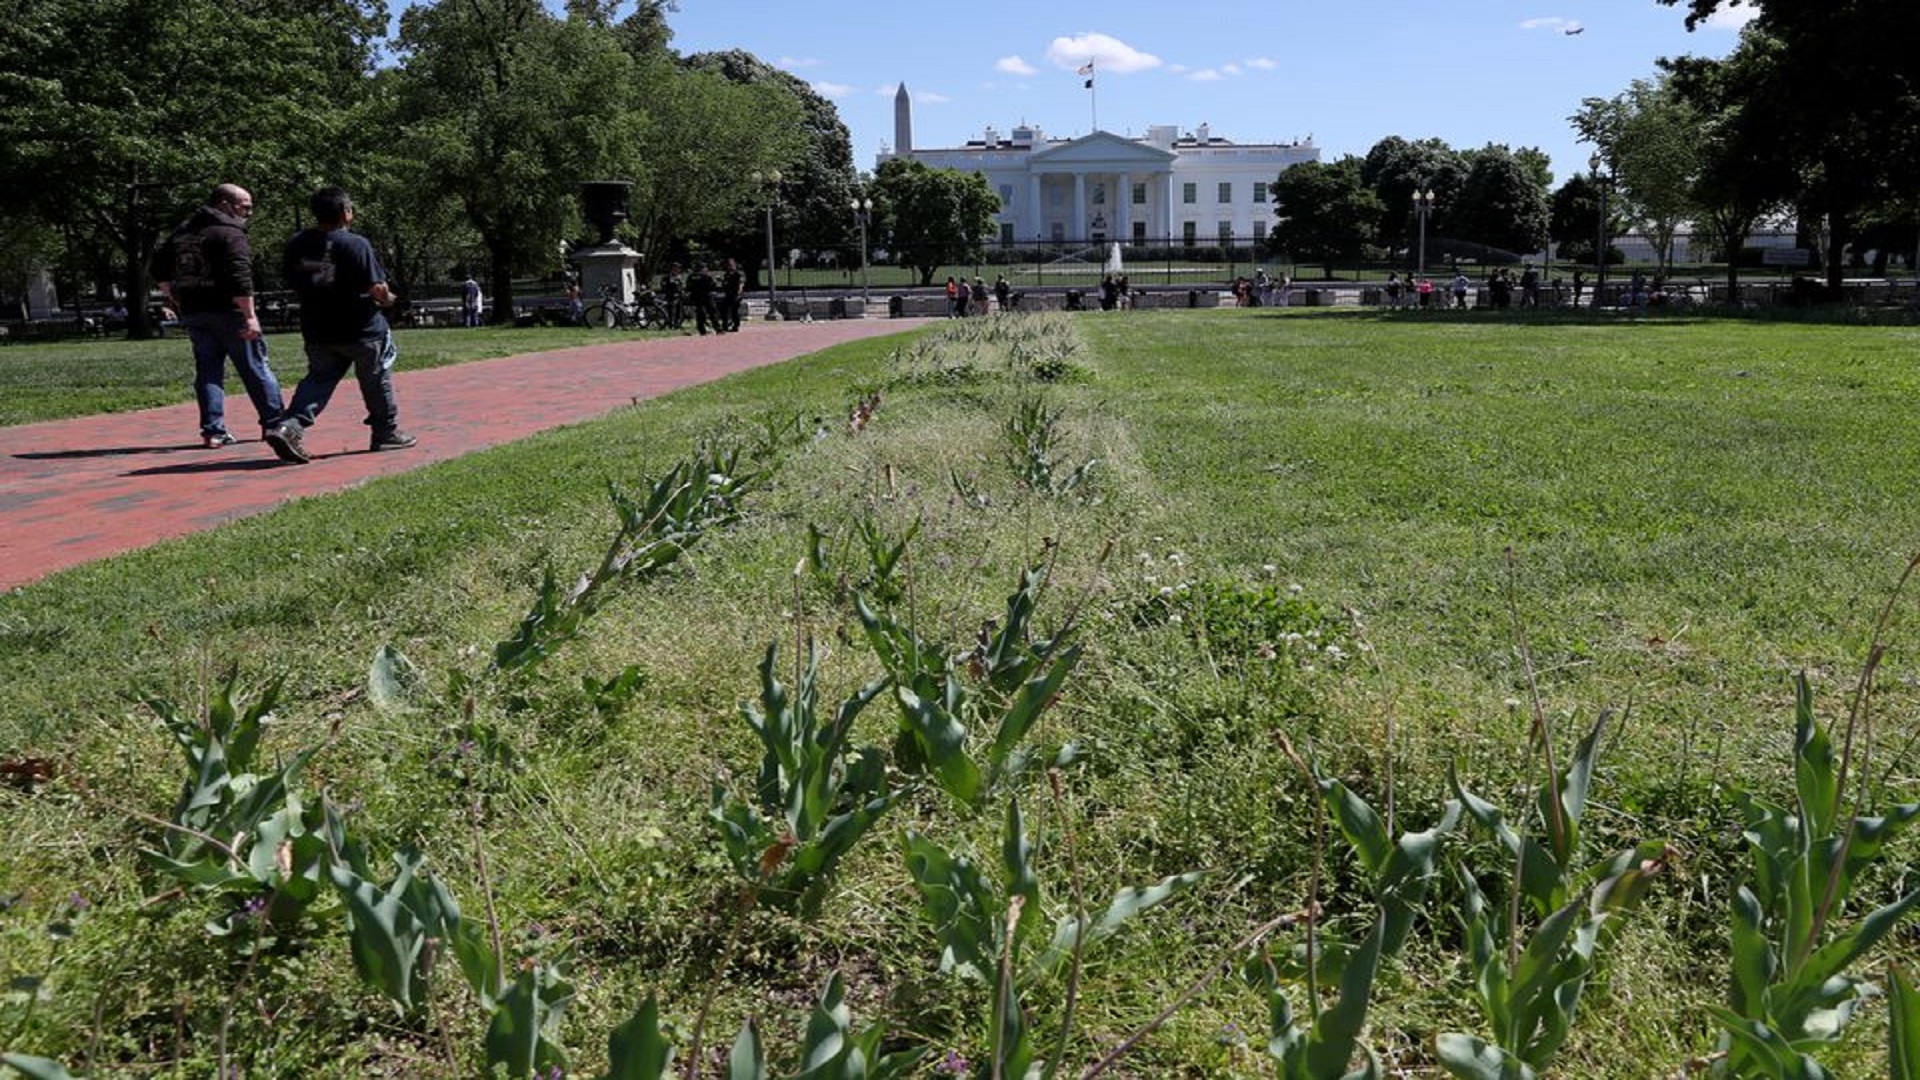 Visitors walk past an overgrown tulip bed in Lafayette Square after the fence was opened to allow public back inside the park after a closure that lasted months outside of the White House in Washington, U.S., May 10, 2021. REUTERS/Leah Millis